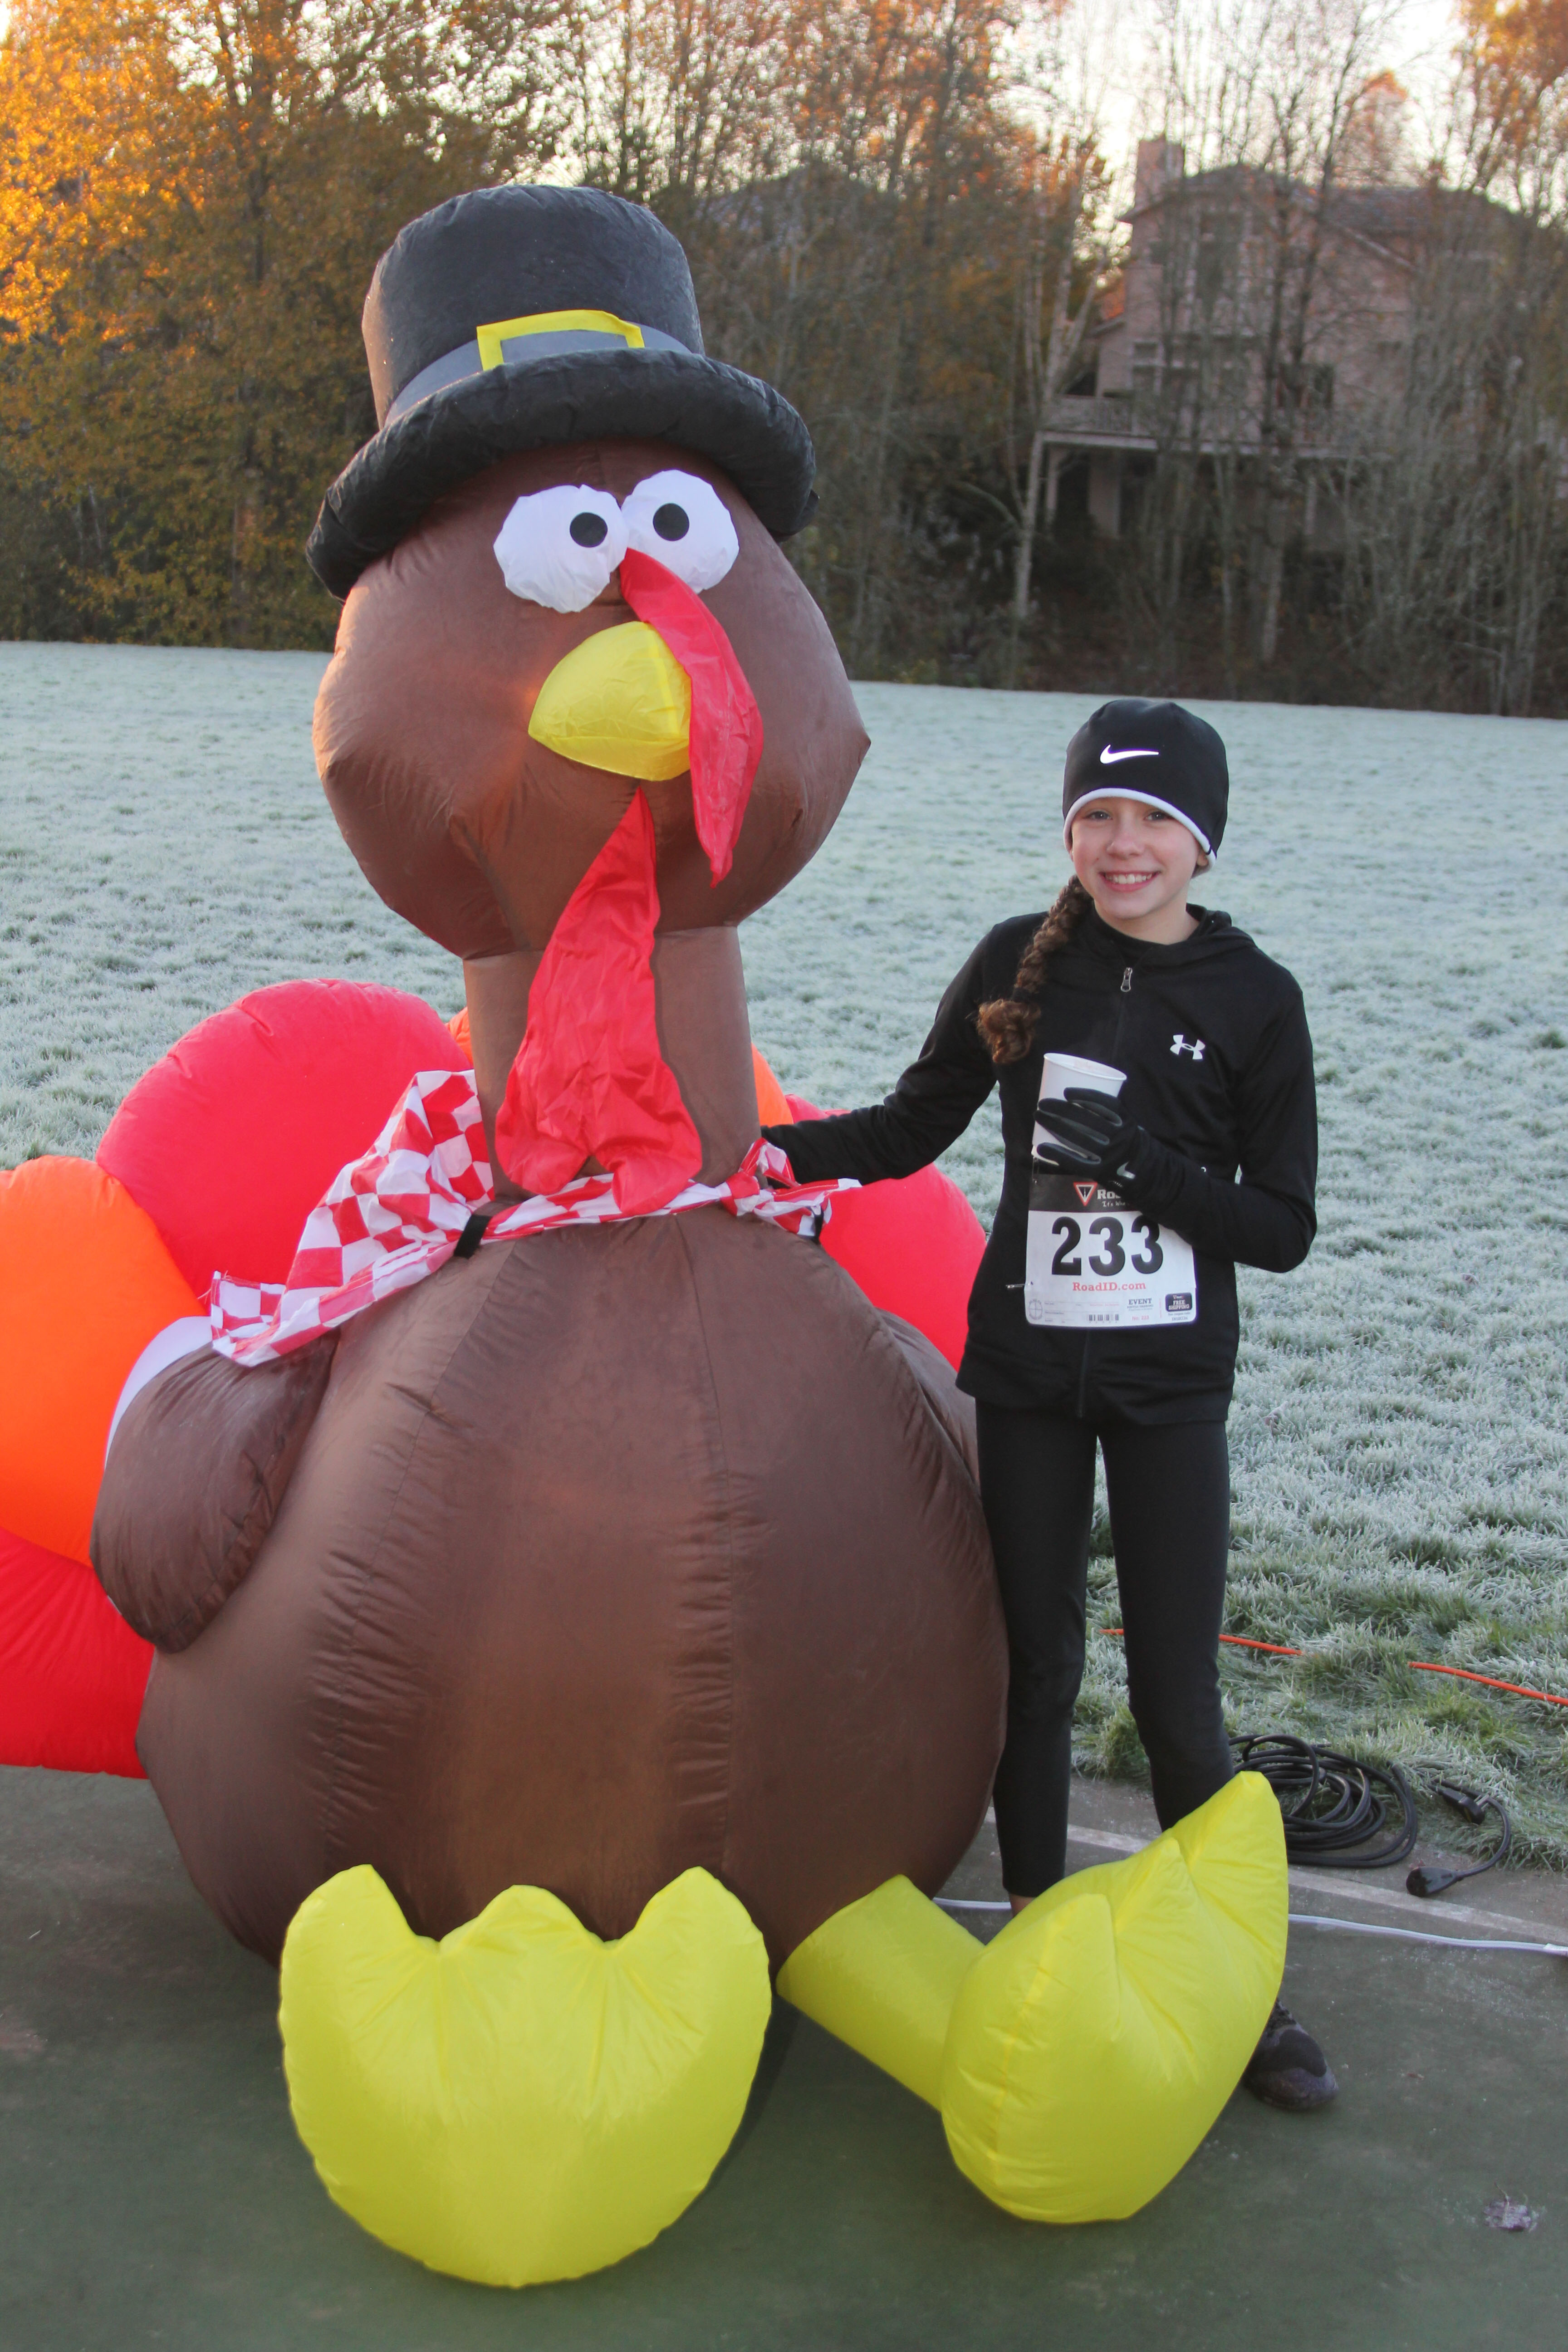 The Turkey Trot was a Smashing Success!